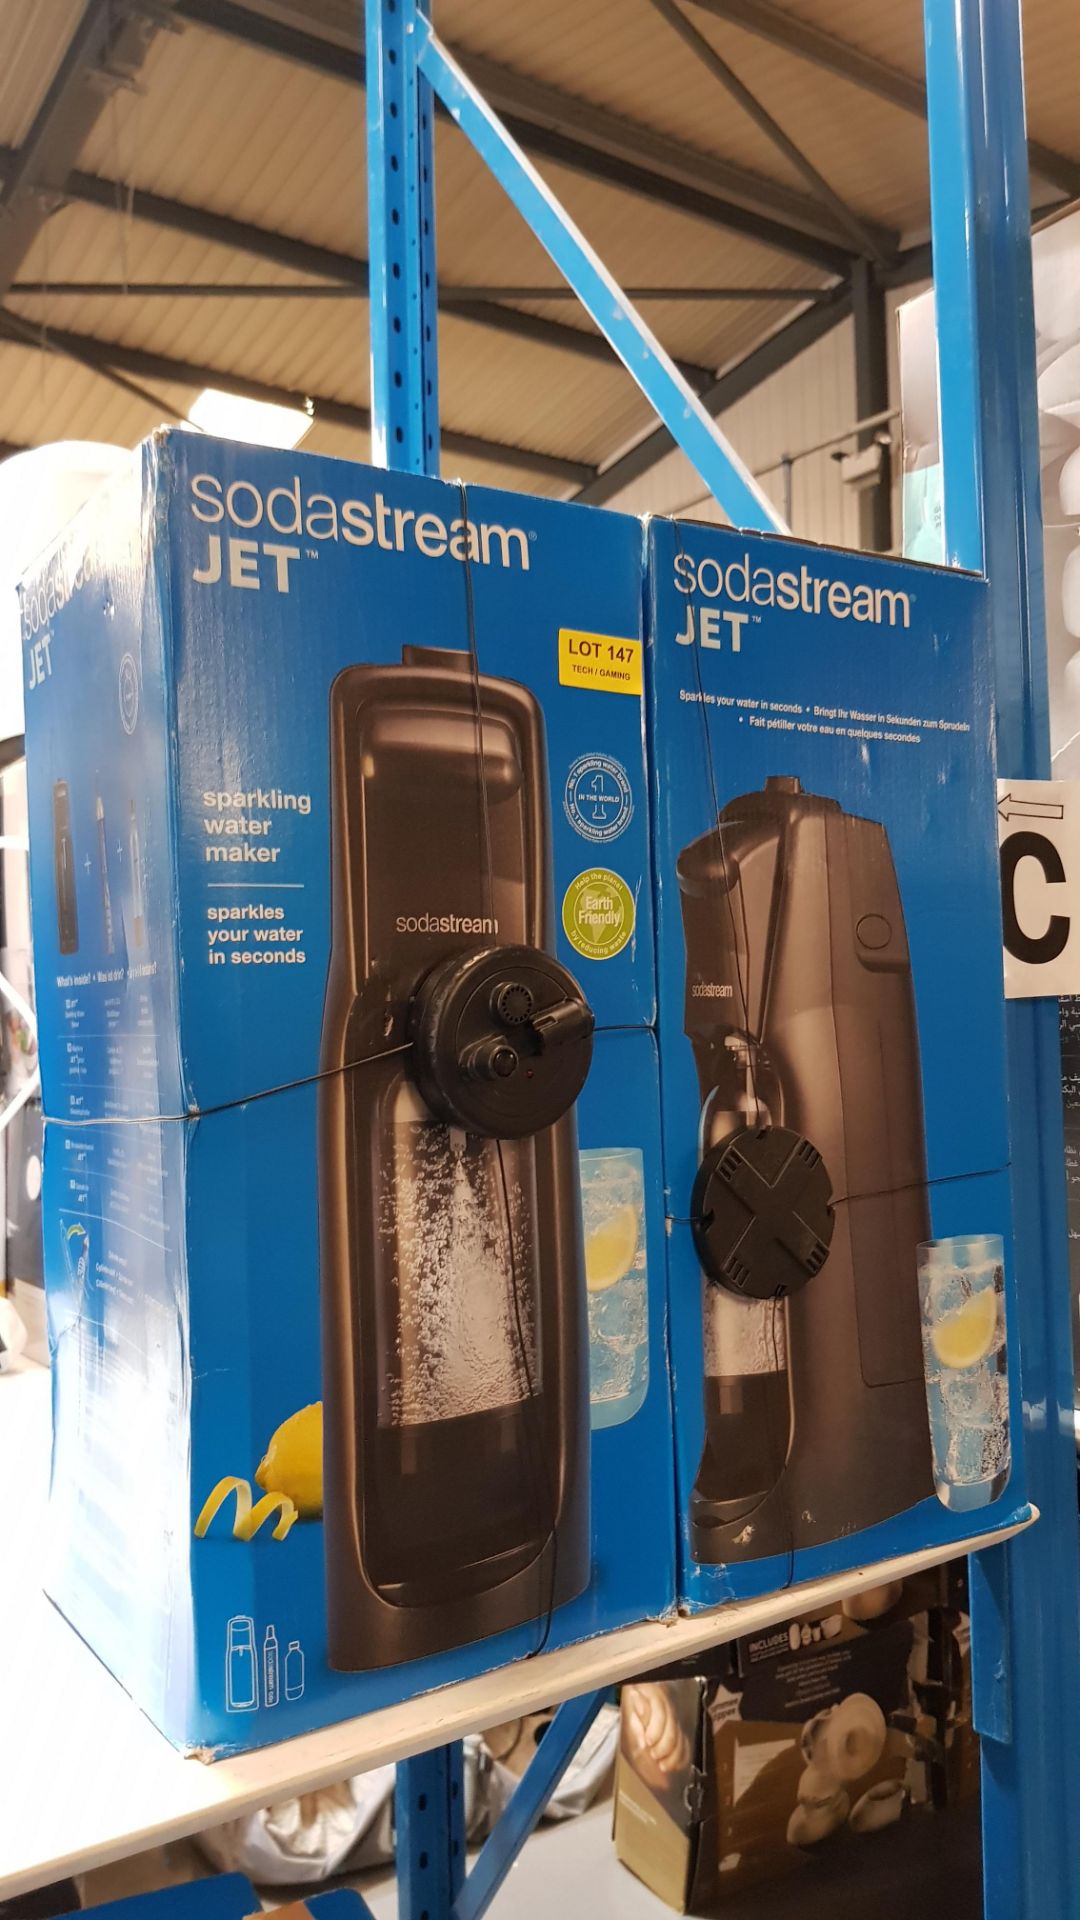 (R1C) 2x SodaStream JET, RRP £79.99. (Both Units Sealed, With Security Tag Attached. As New). - Image 3 of 3